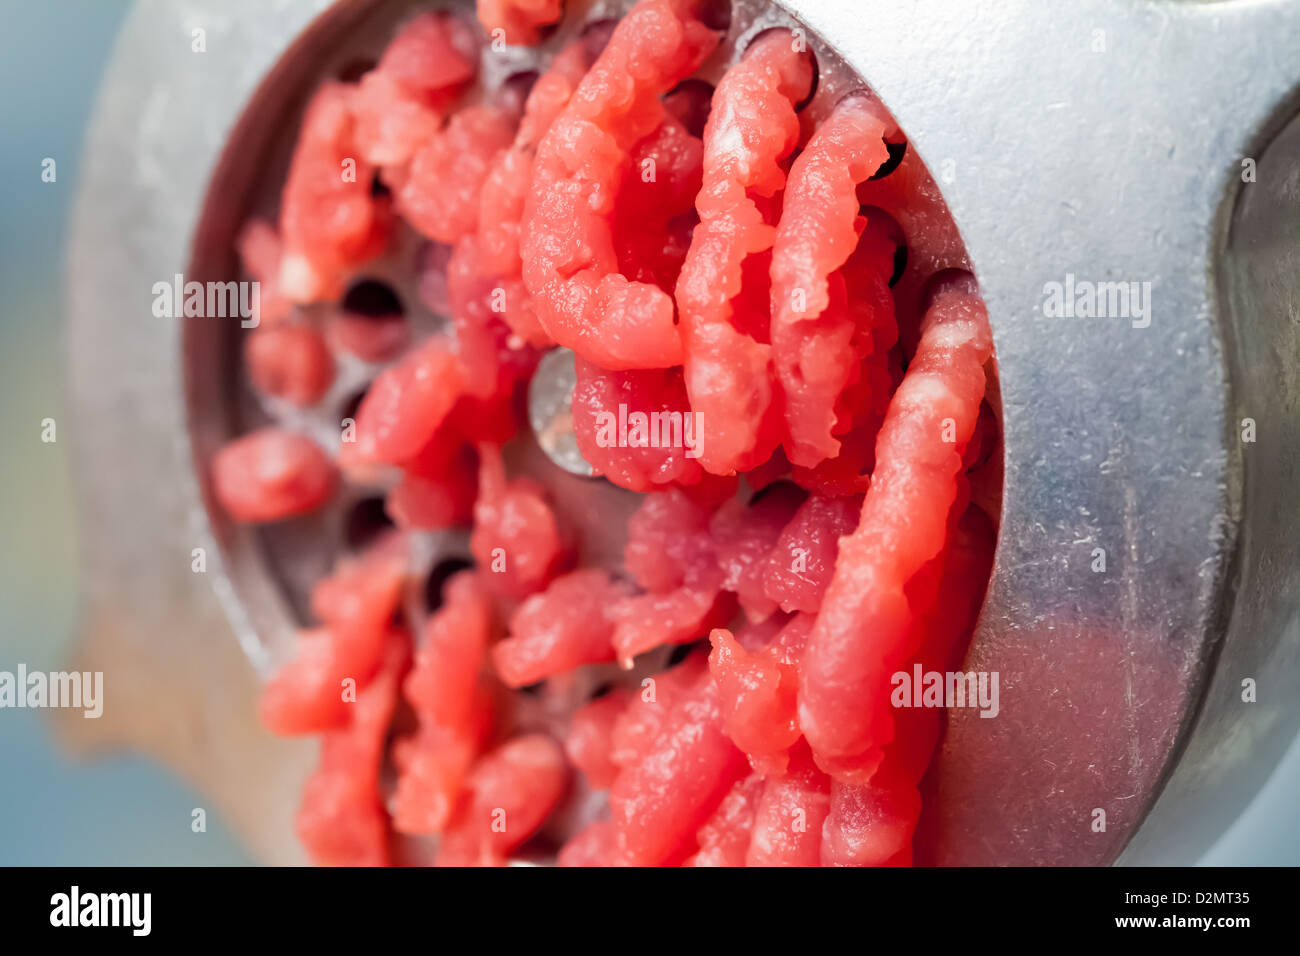 Macro photo of mincer machine with fresh chopped meat Stock Photo